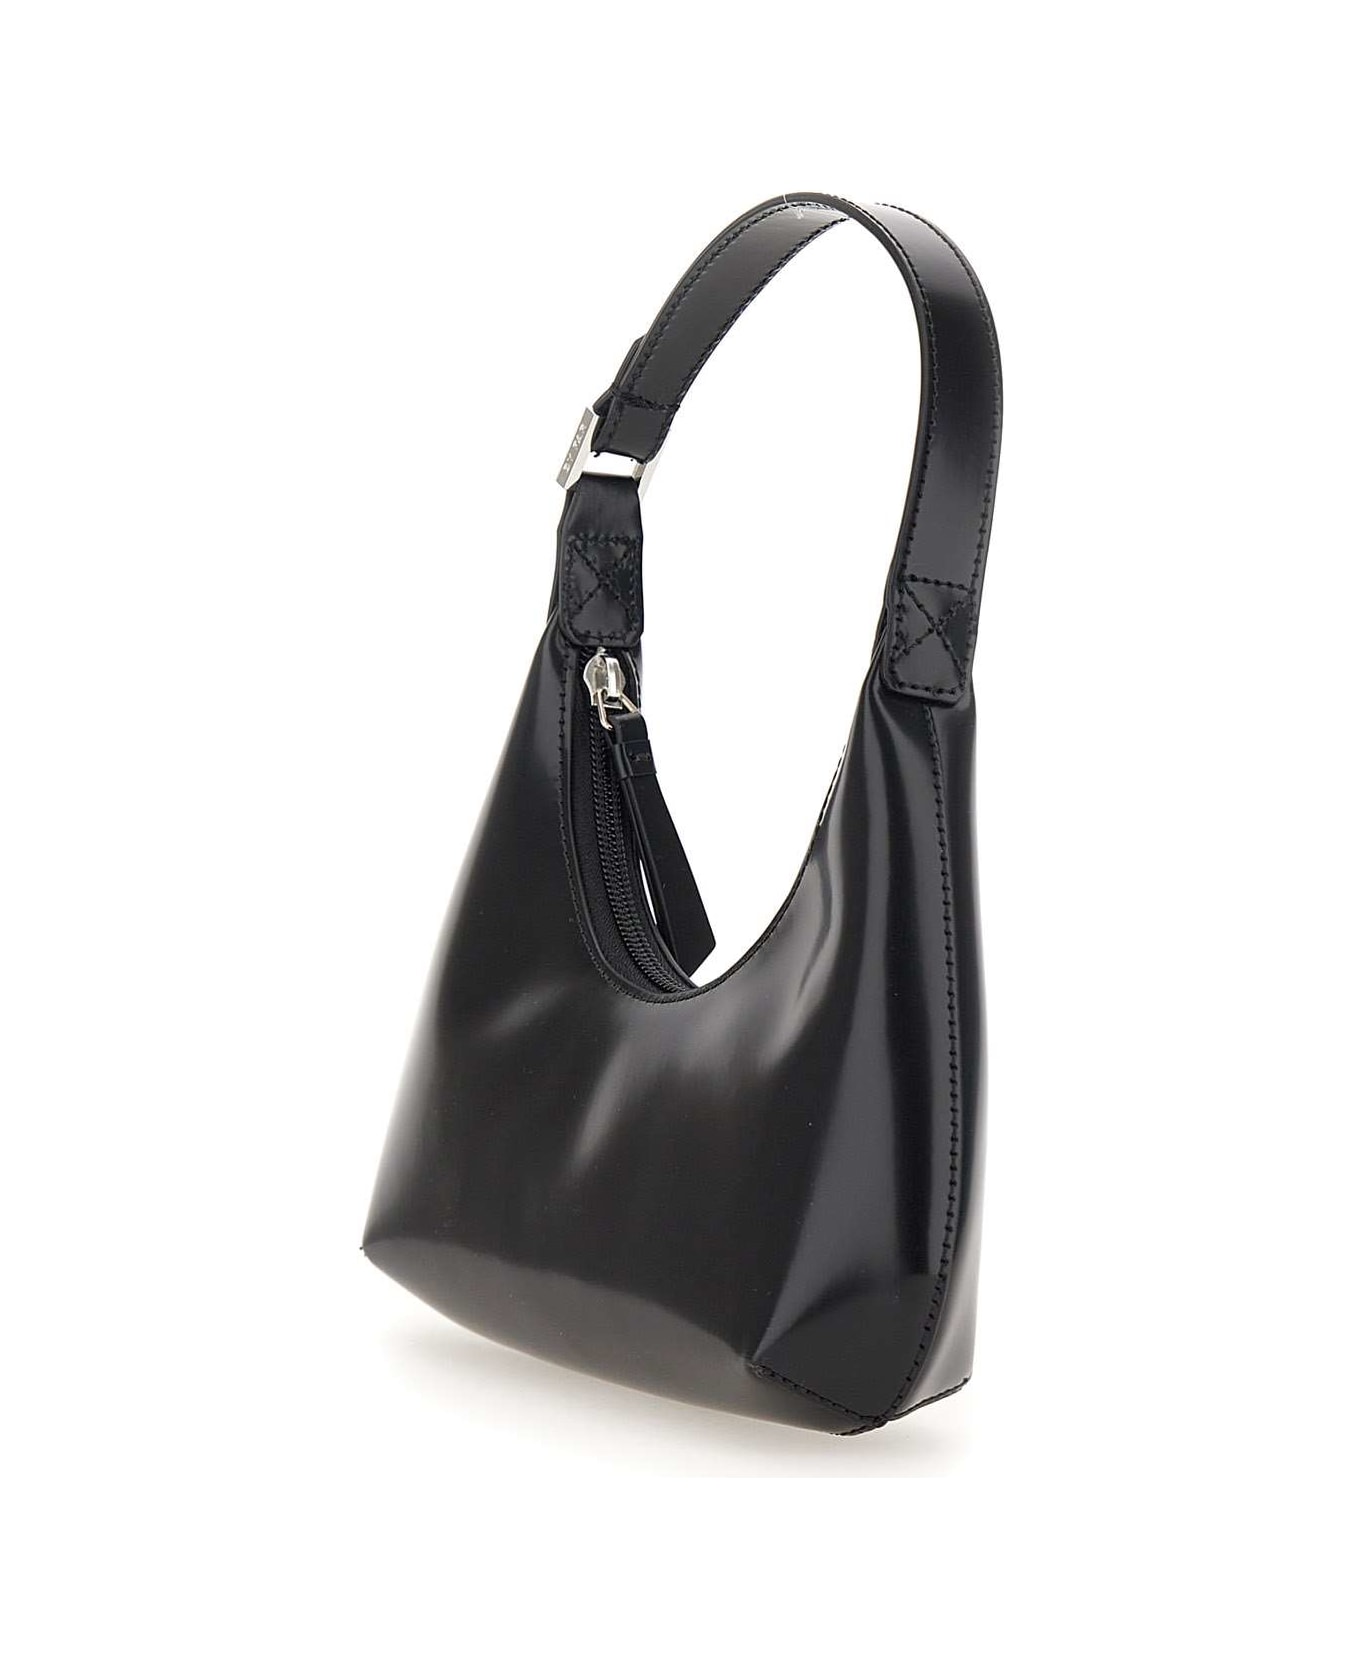 BY FAR "baby Amber" Leather Bag - BLACK